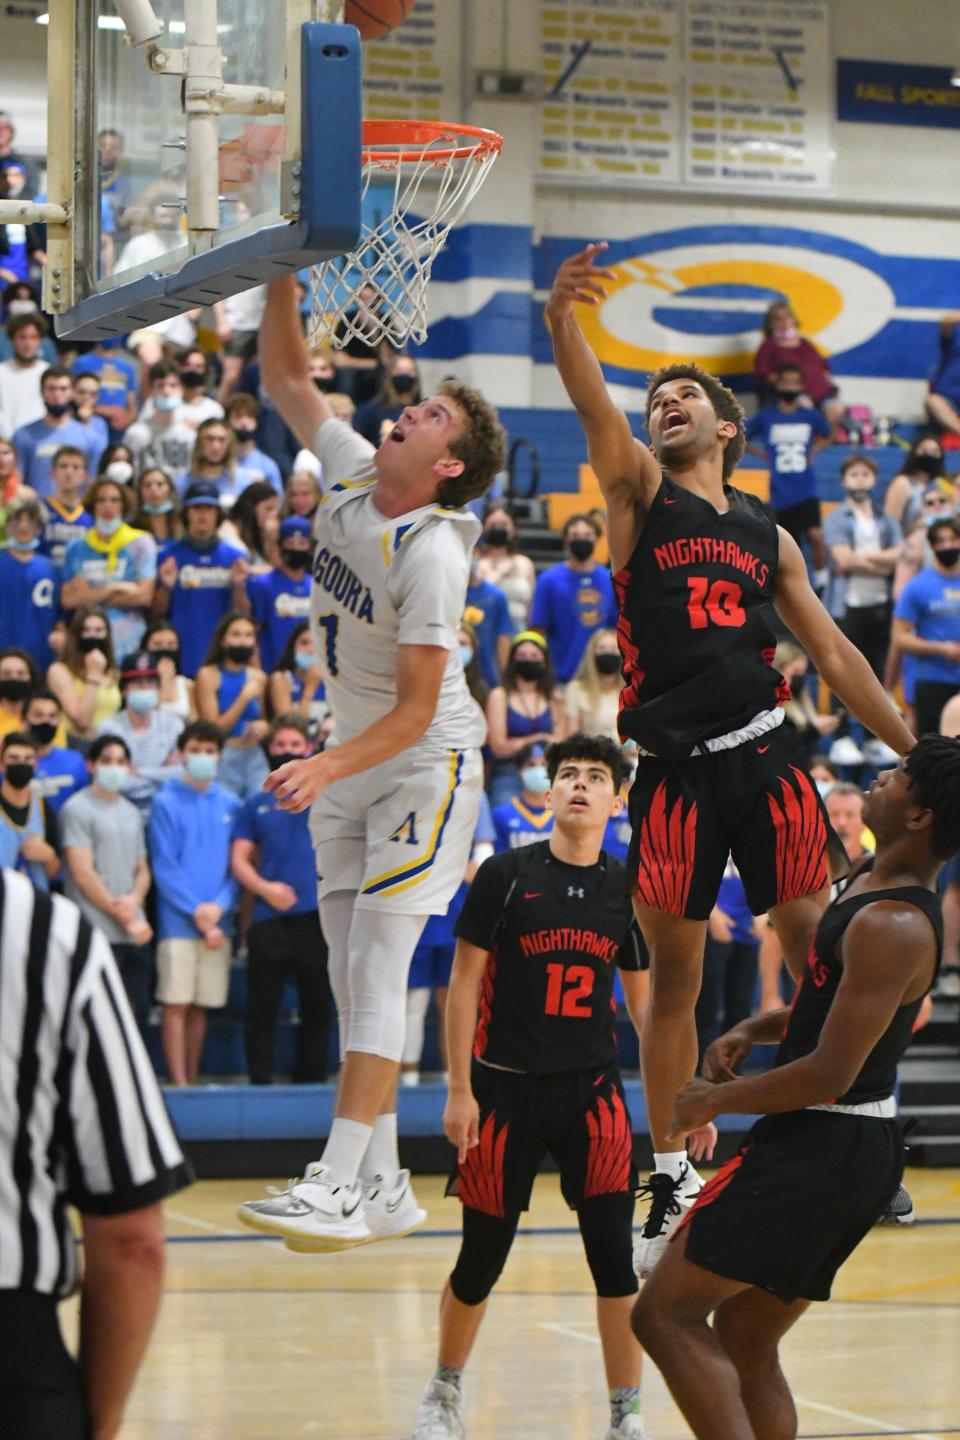 After scoring an area-record 62 points in one game, Jed Miller led Agoura to a CIF-SS final.